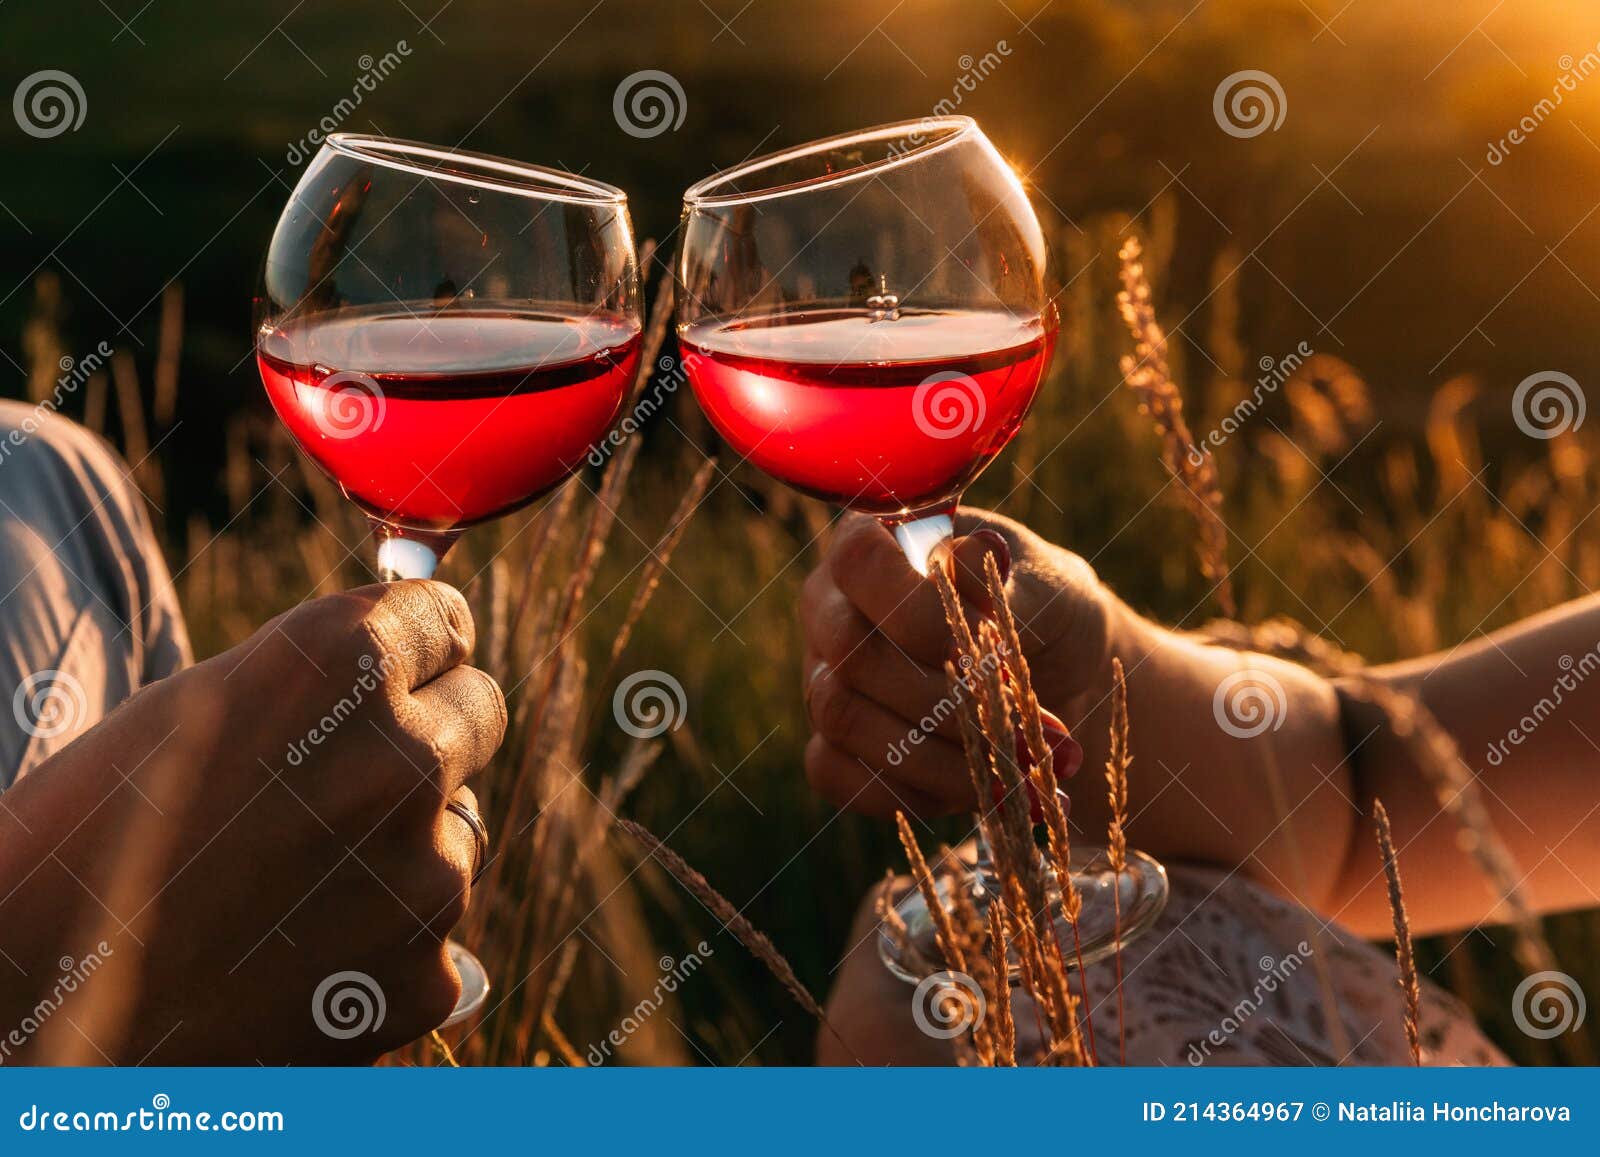 Cheers Two Red Wine Glasses, Toast by Domin domin